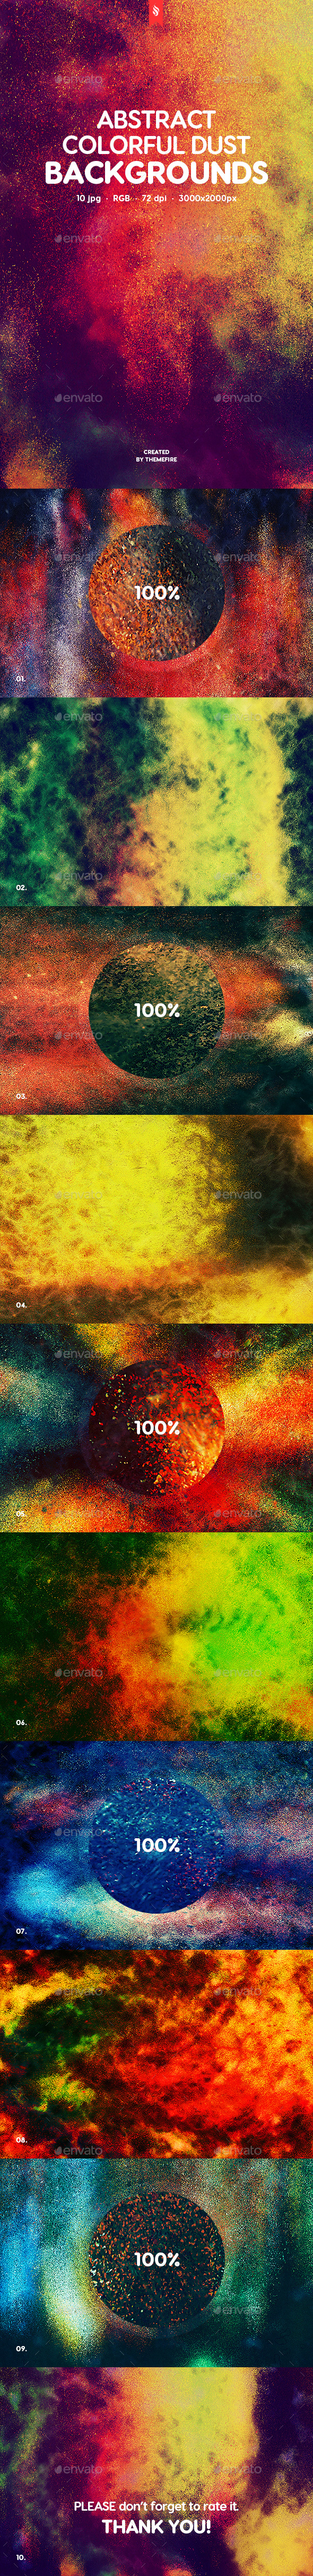 Abstract Colorful Dust Backgrounds